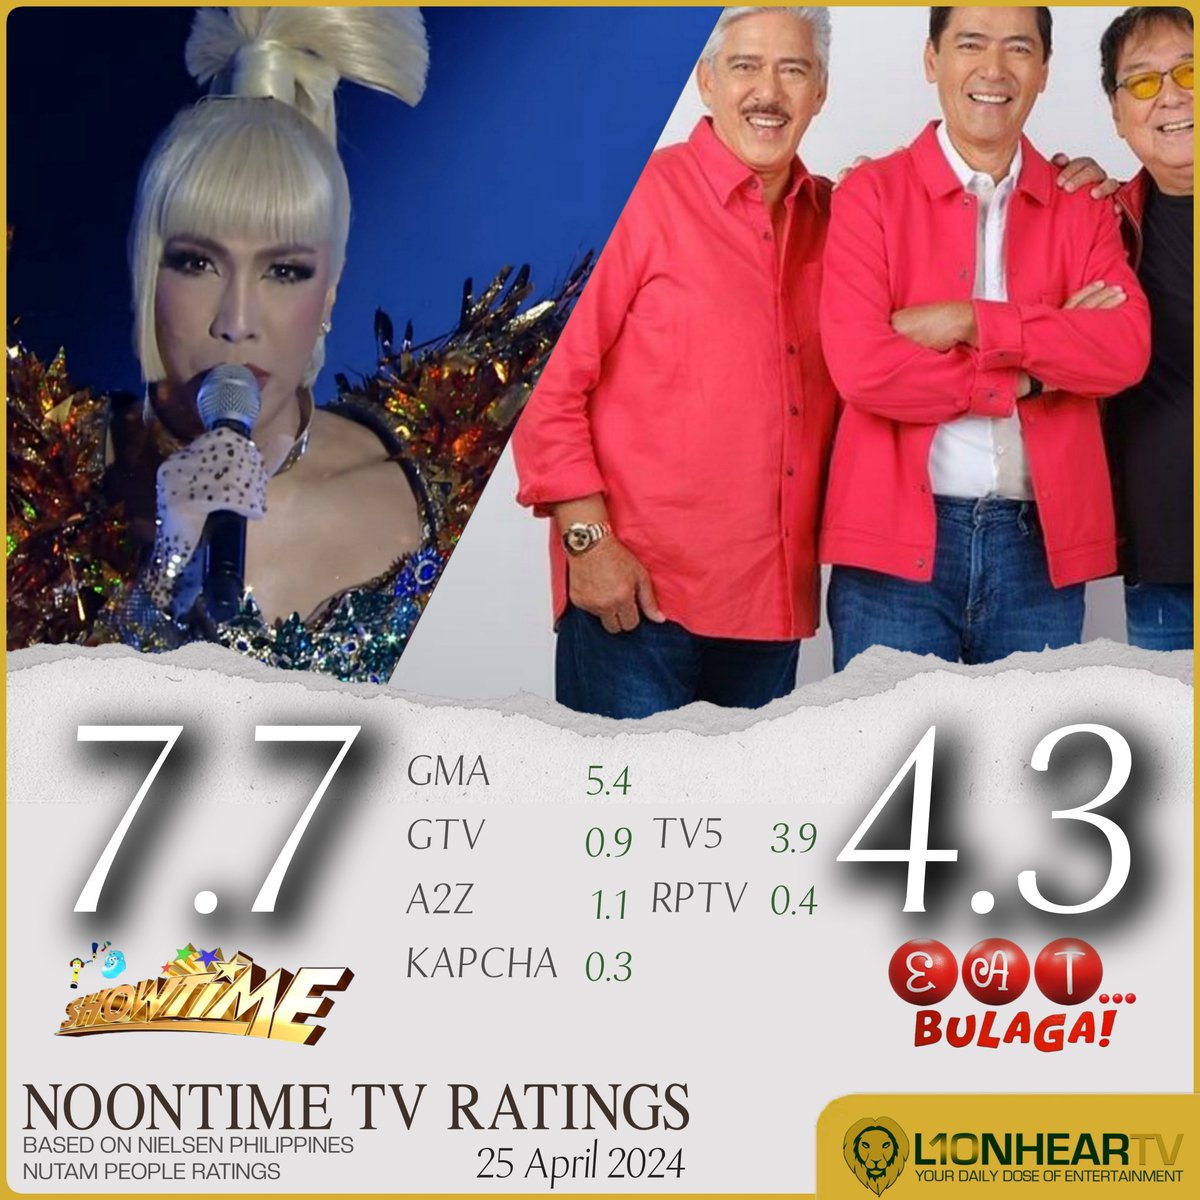 LOOK: #ItsShowtime remains the unrivaled noontime leader, pulling off another sizable lead versus 4-decade #EATBulaga, on Thursday, April 25.

MORE RATINGS: lionheartv.net/ratings